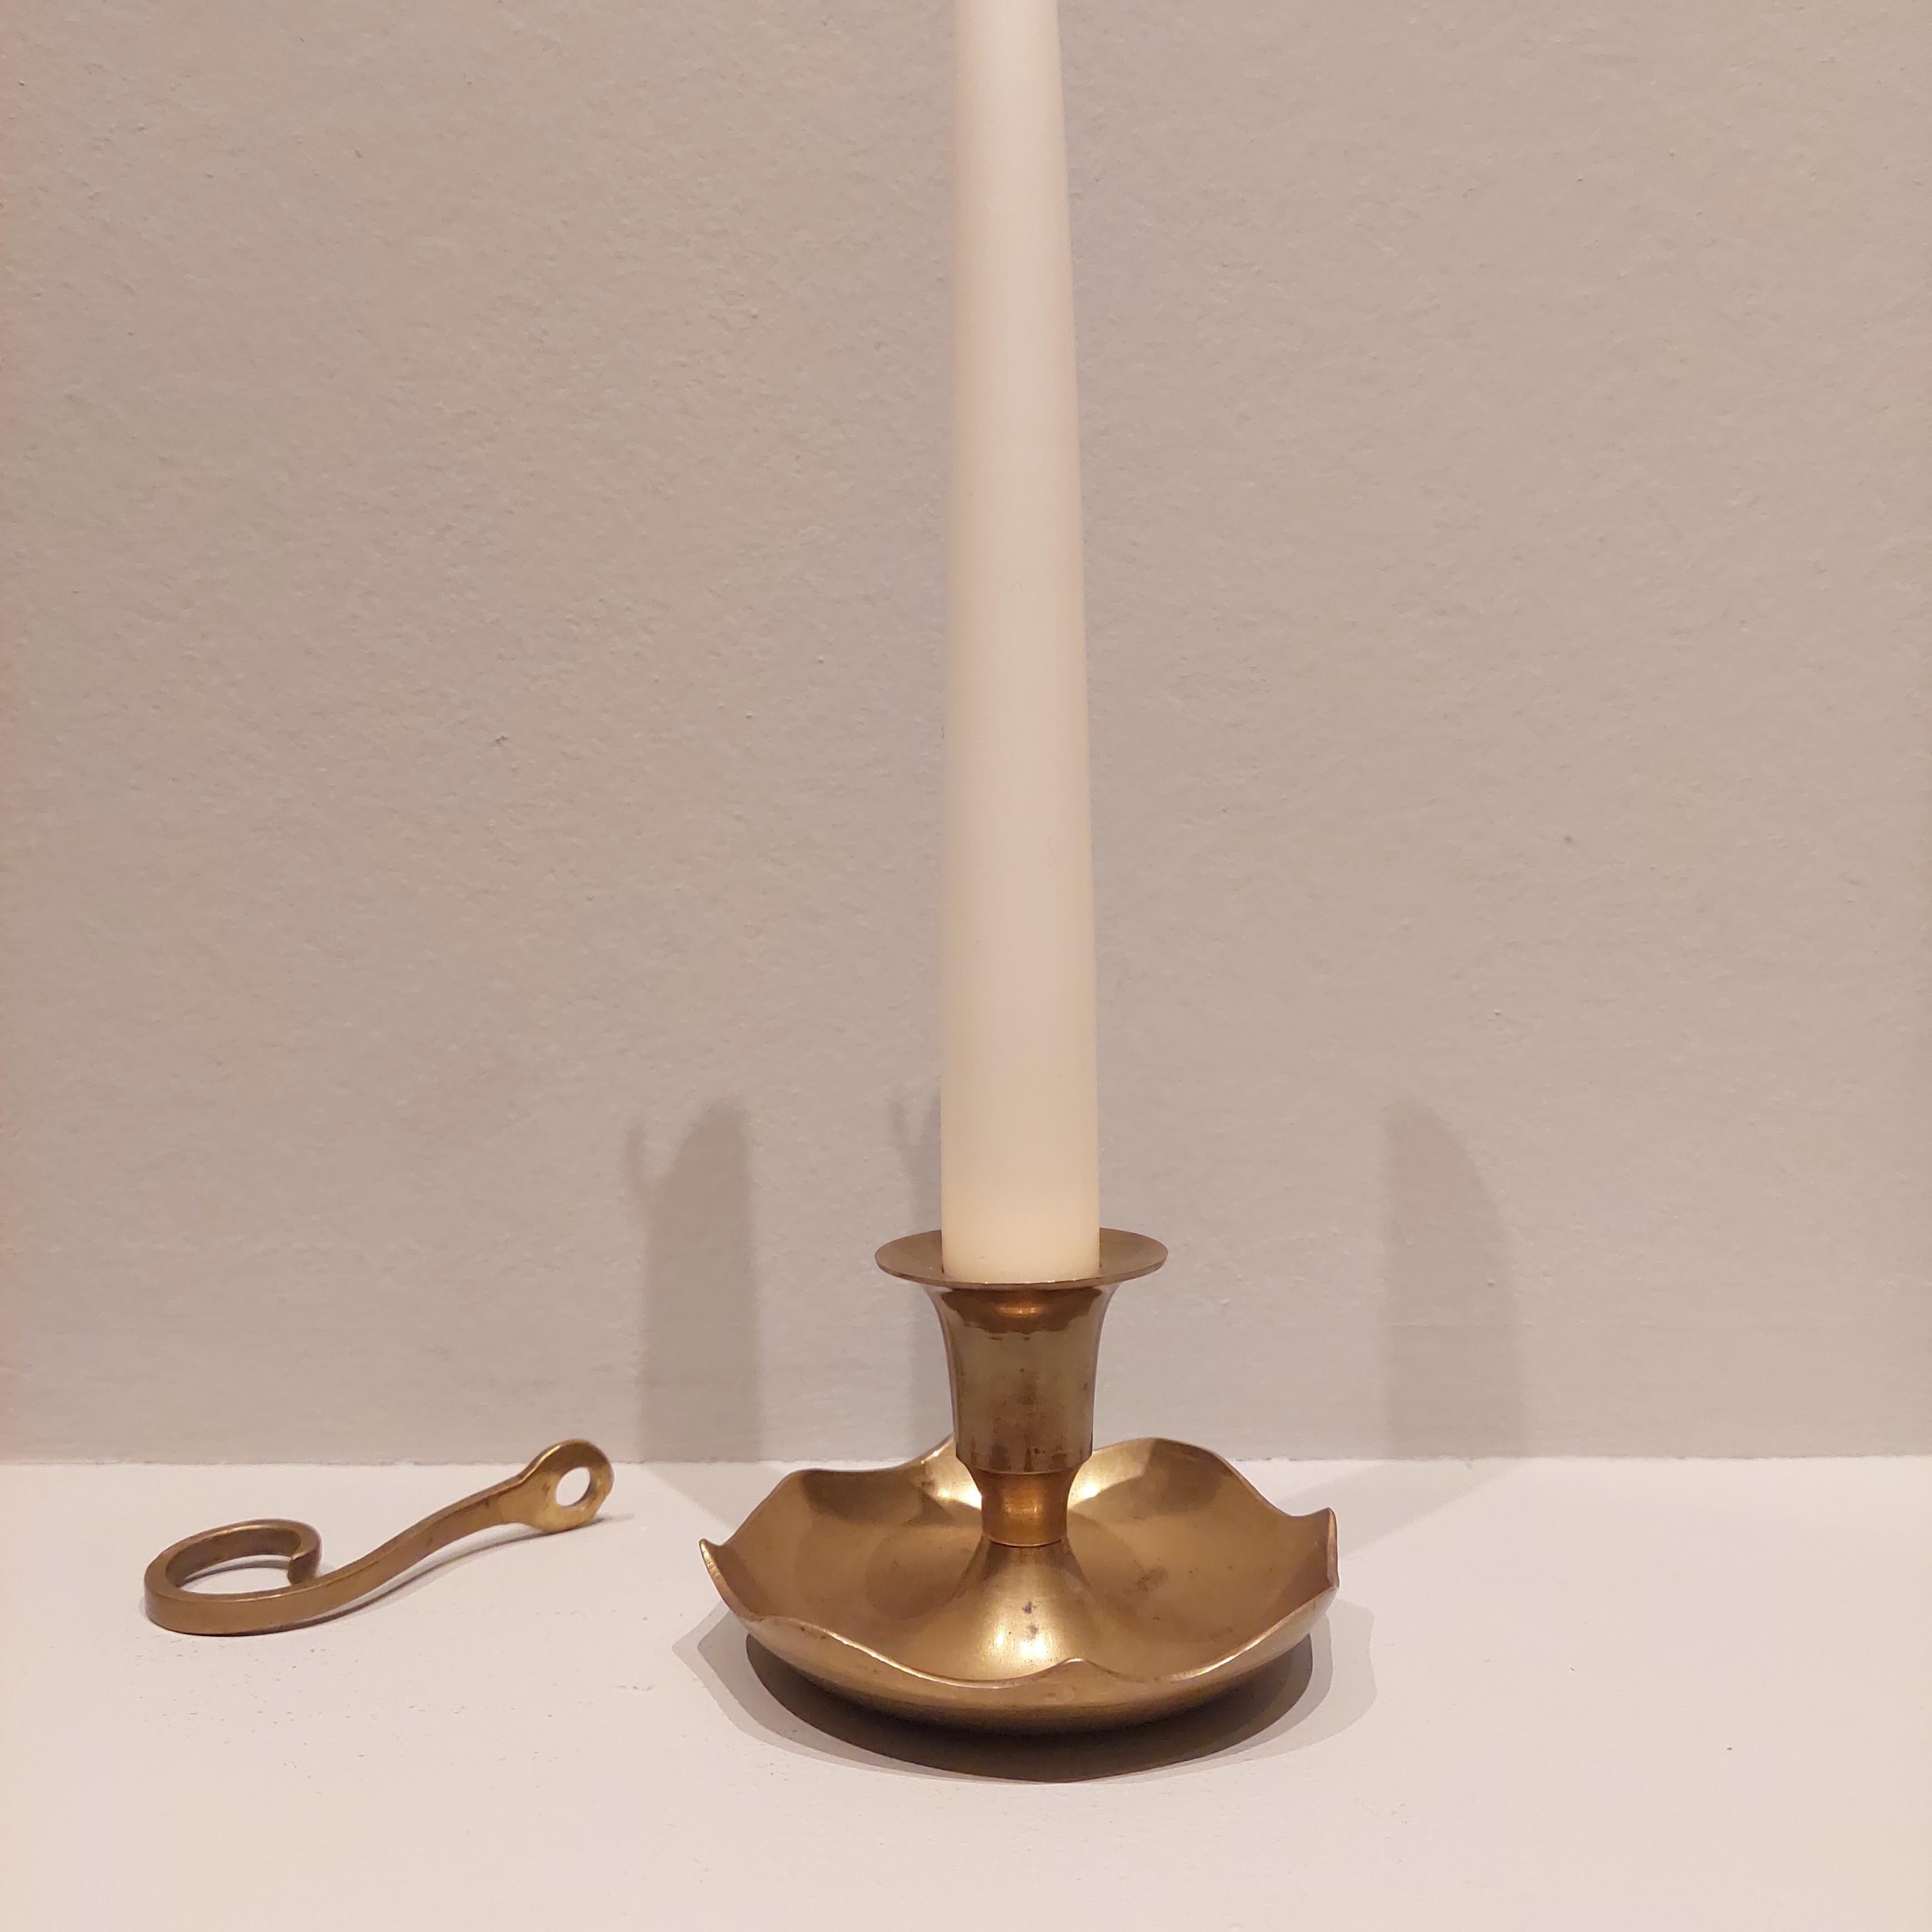 European Vintage Brass Scalloped Chamberstick candle holder candlestick, 1940s For Sale